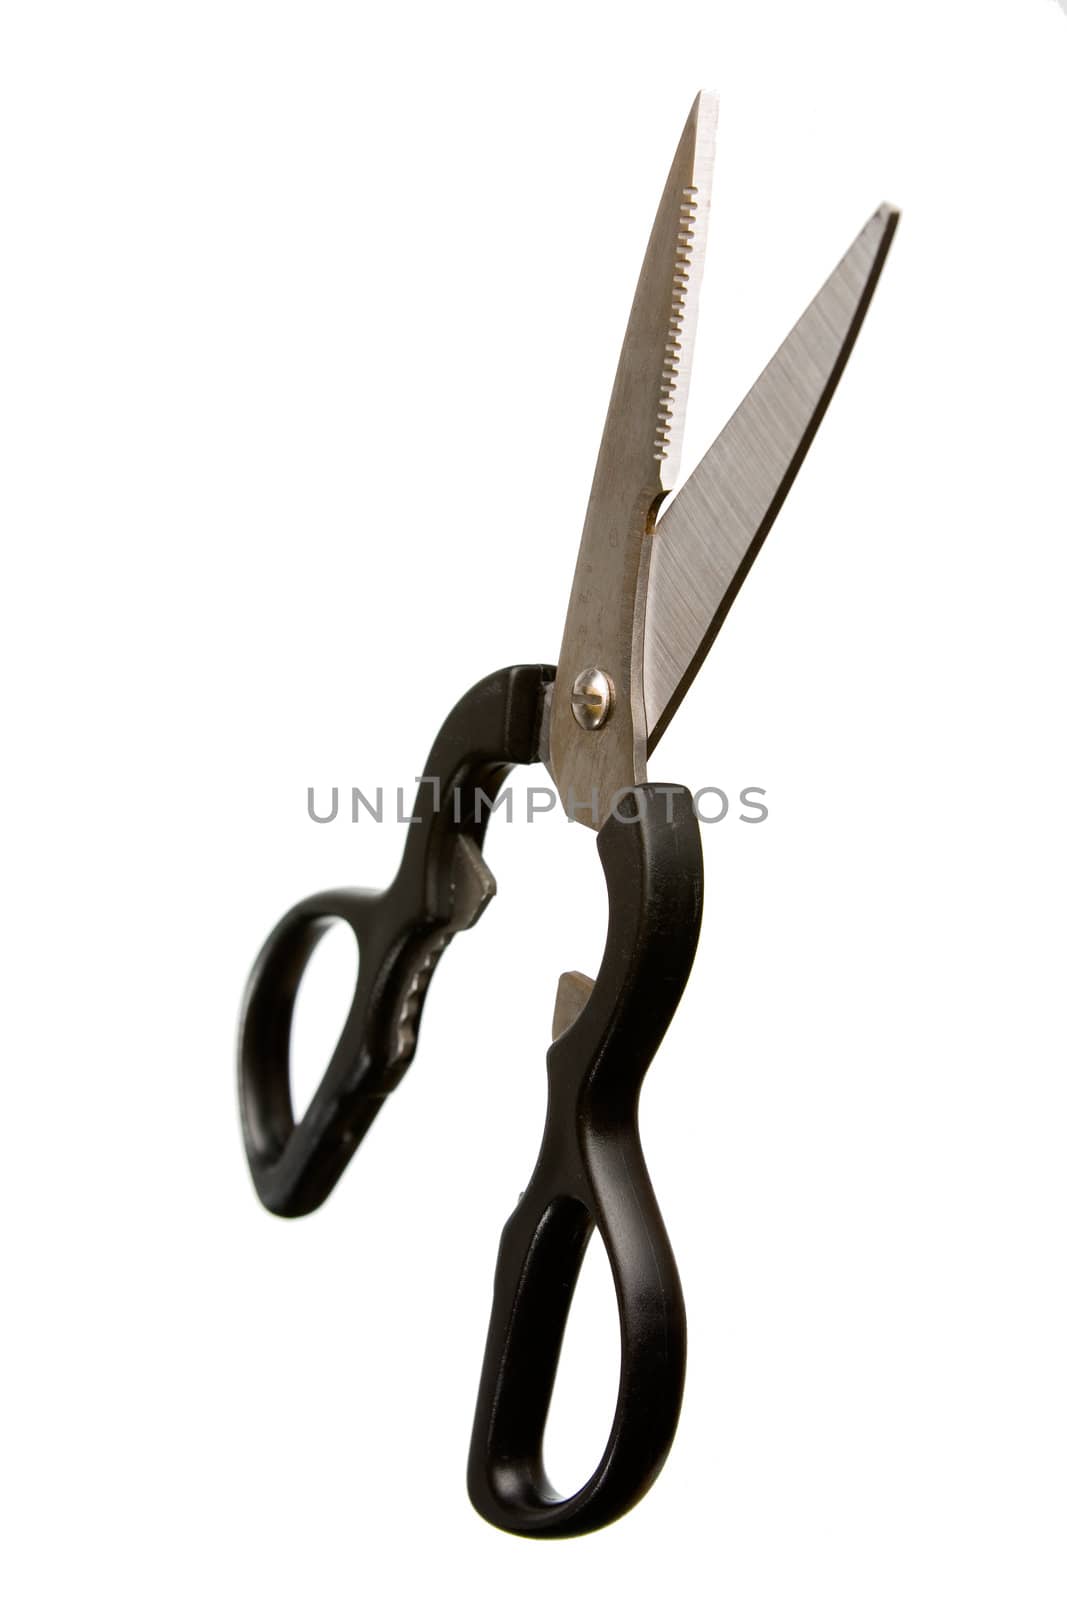 Kitchen scissors isolated on a white background